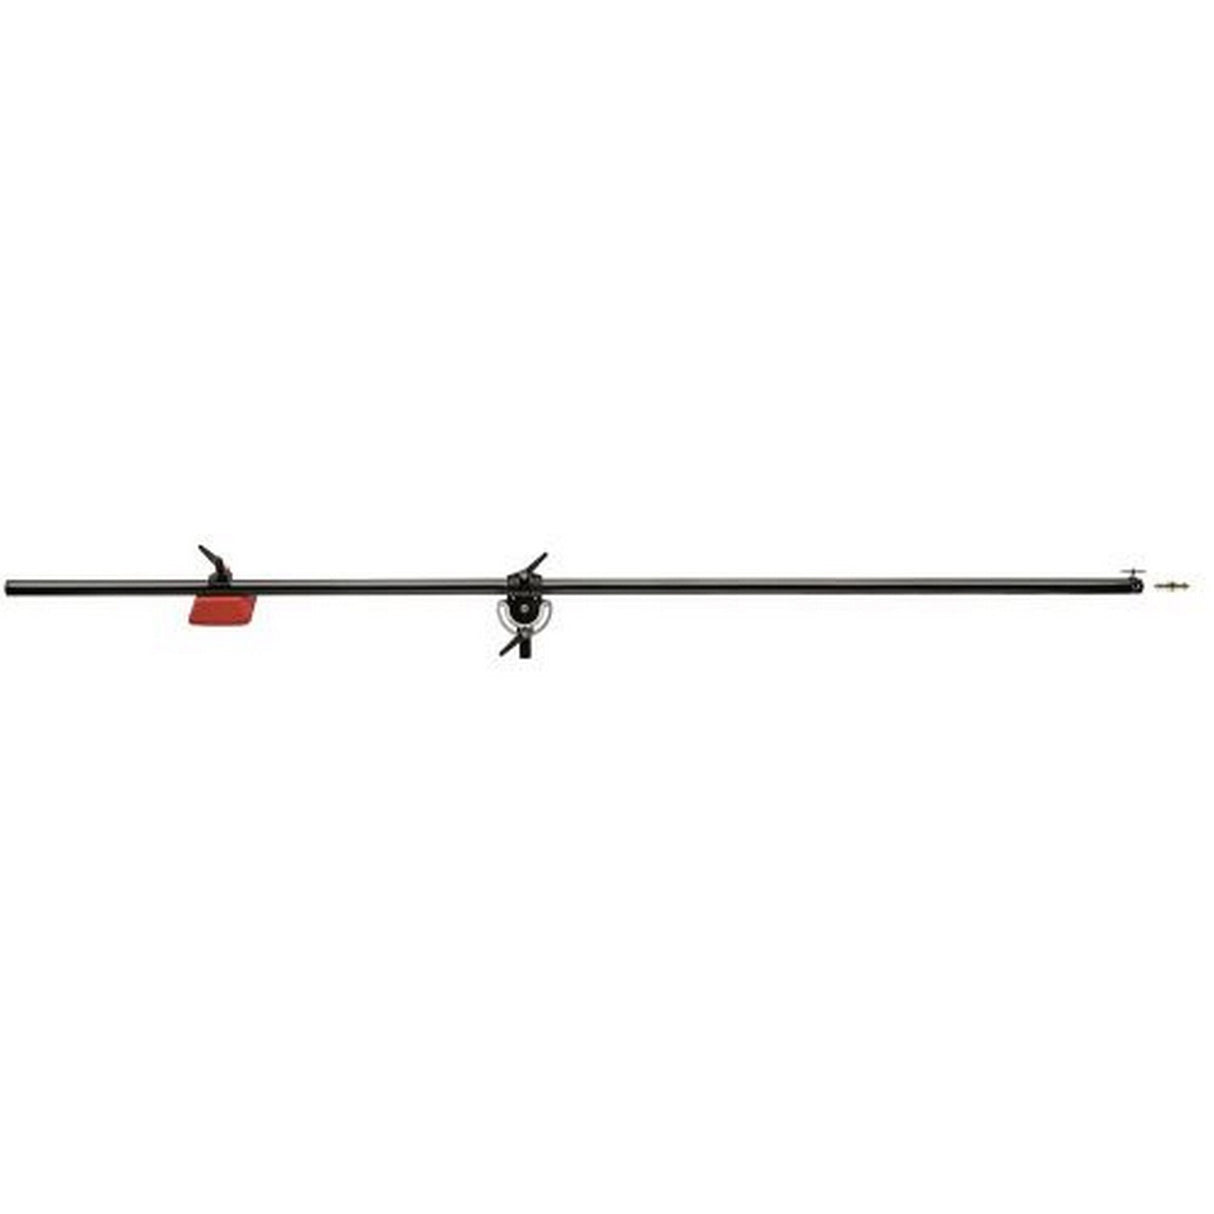 Manfrotto 085BSL Heavy Duty 3-Section Boom Only without Stand, Black